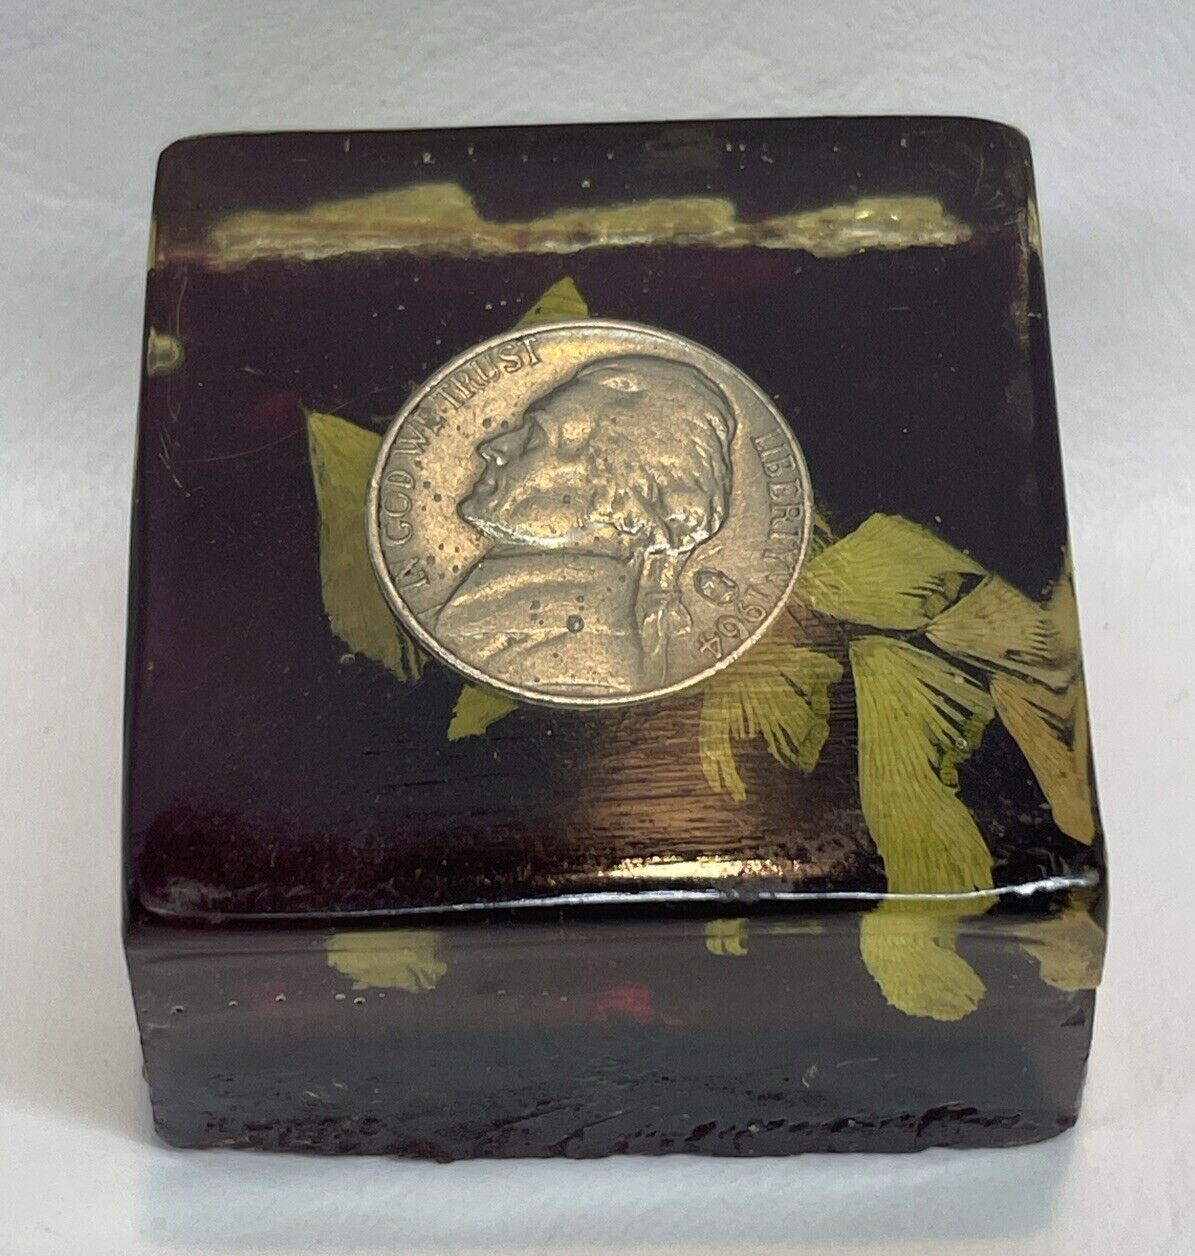 Vtg 1964 Nickel Embedded in Square Homemade Resin Paperweight Leaf Frond